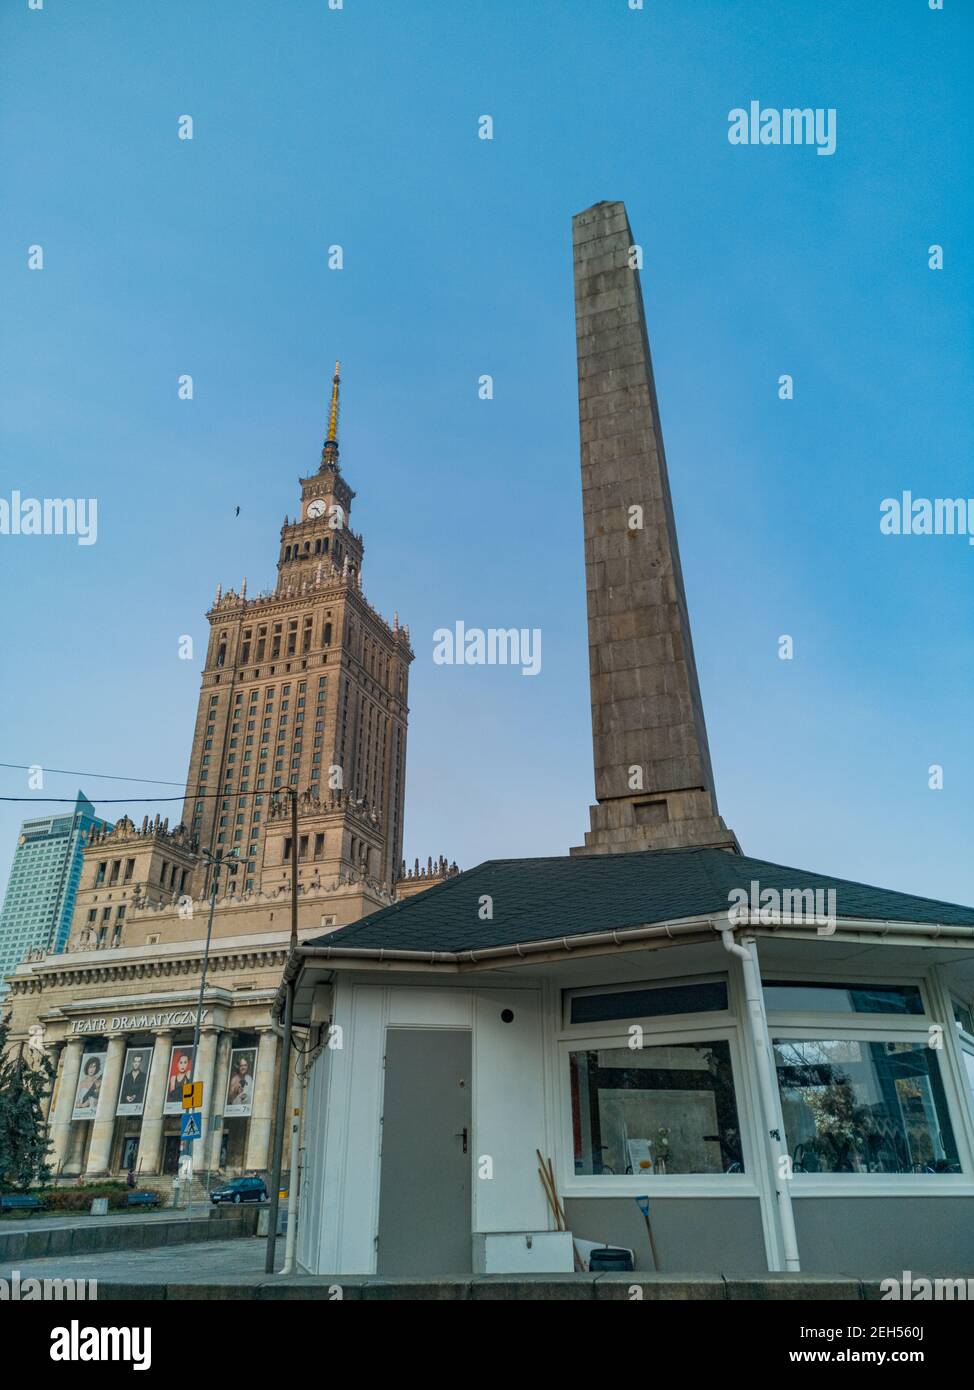 Warsaw November 10 2019 Tower of newsstand in front of tower of Palace of Culture and Science Stock Photo